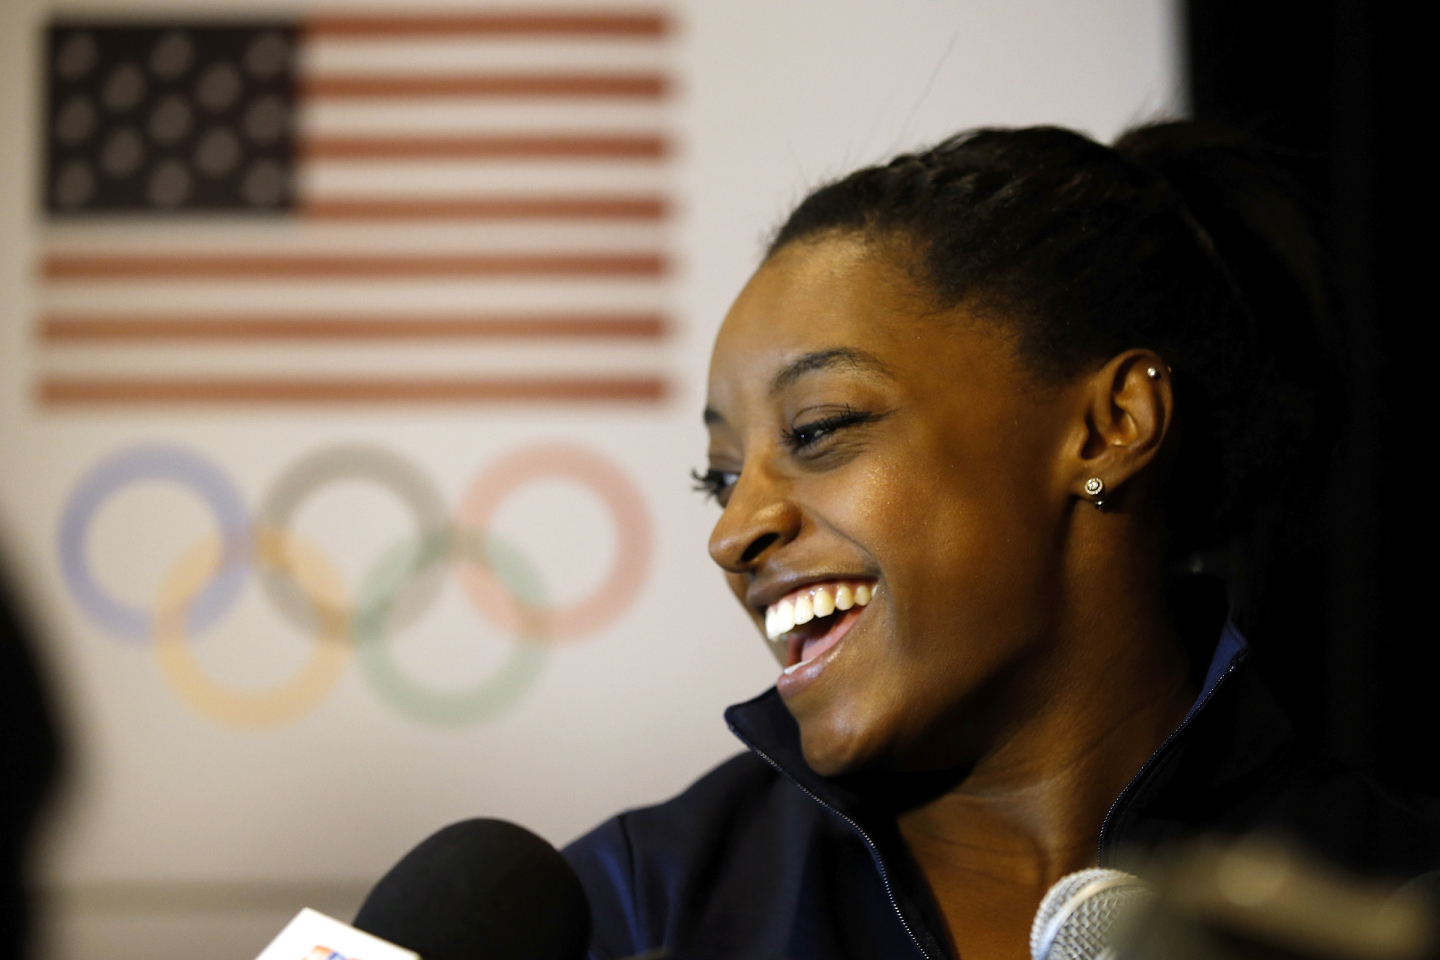 BEVERLY HILLS, CA - MARCH 07: Gymnast Simone Biles addresses the media at the USOC Olympic Media Summit at The Beverly Hilton Hotel on March 7, 2016 in Beverly Hills, California.   Todd Warshaw/Getty Images for the USOC/AFP